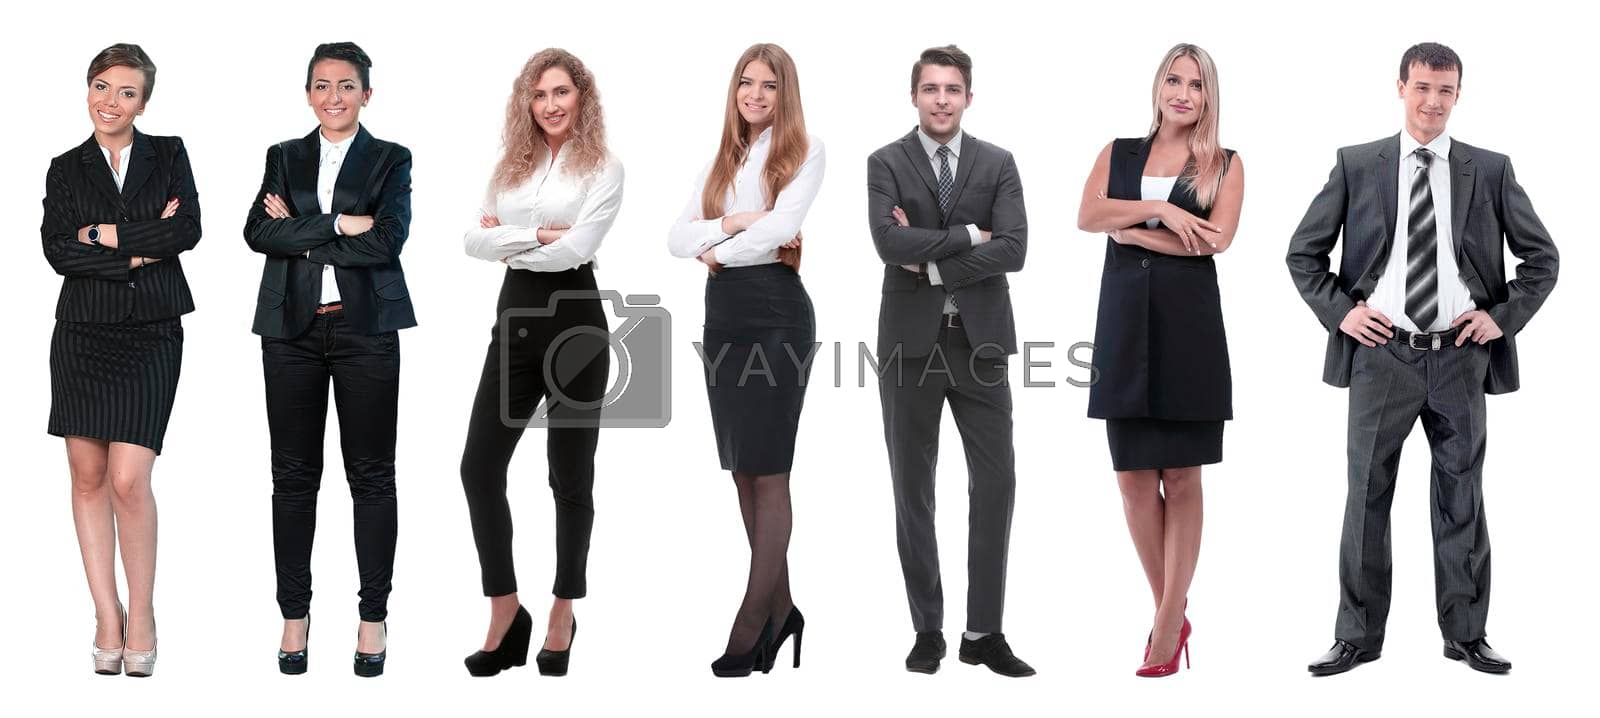 Royalty free image of Collage of mixed age group of focused business professionals by asdf